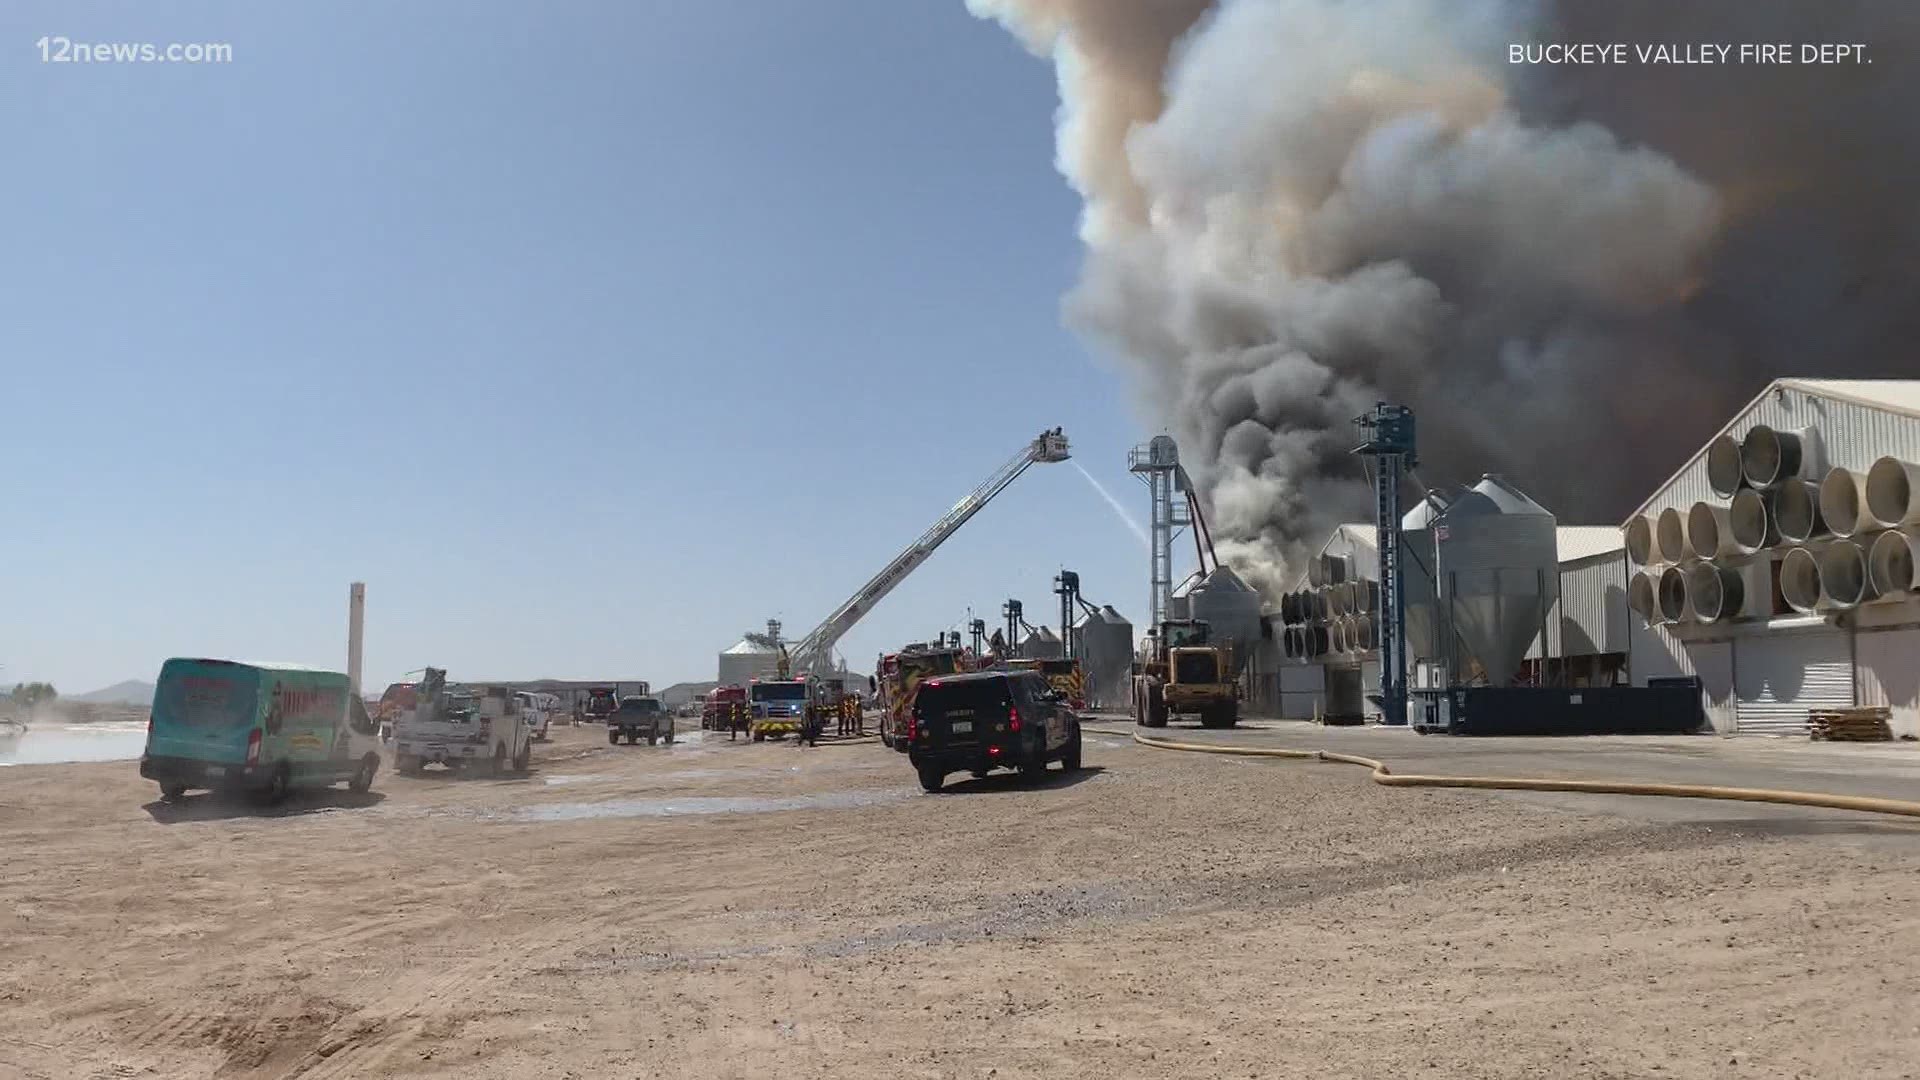 A massive barn fire at Hickman's Egg Farm caused an indeterminate amount of damage as around 60 fire personnel worked to extinguish the flames.